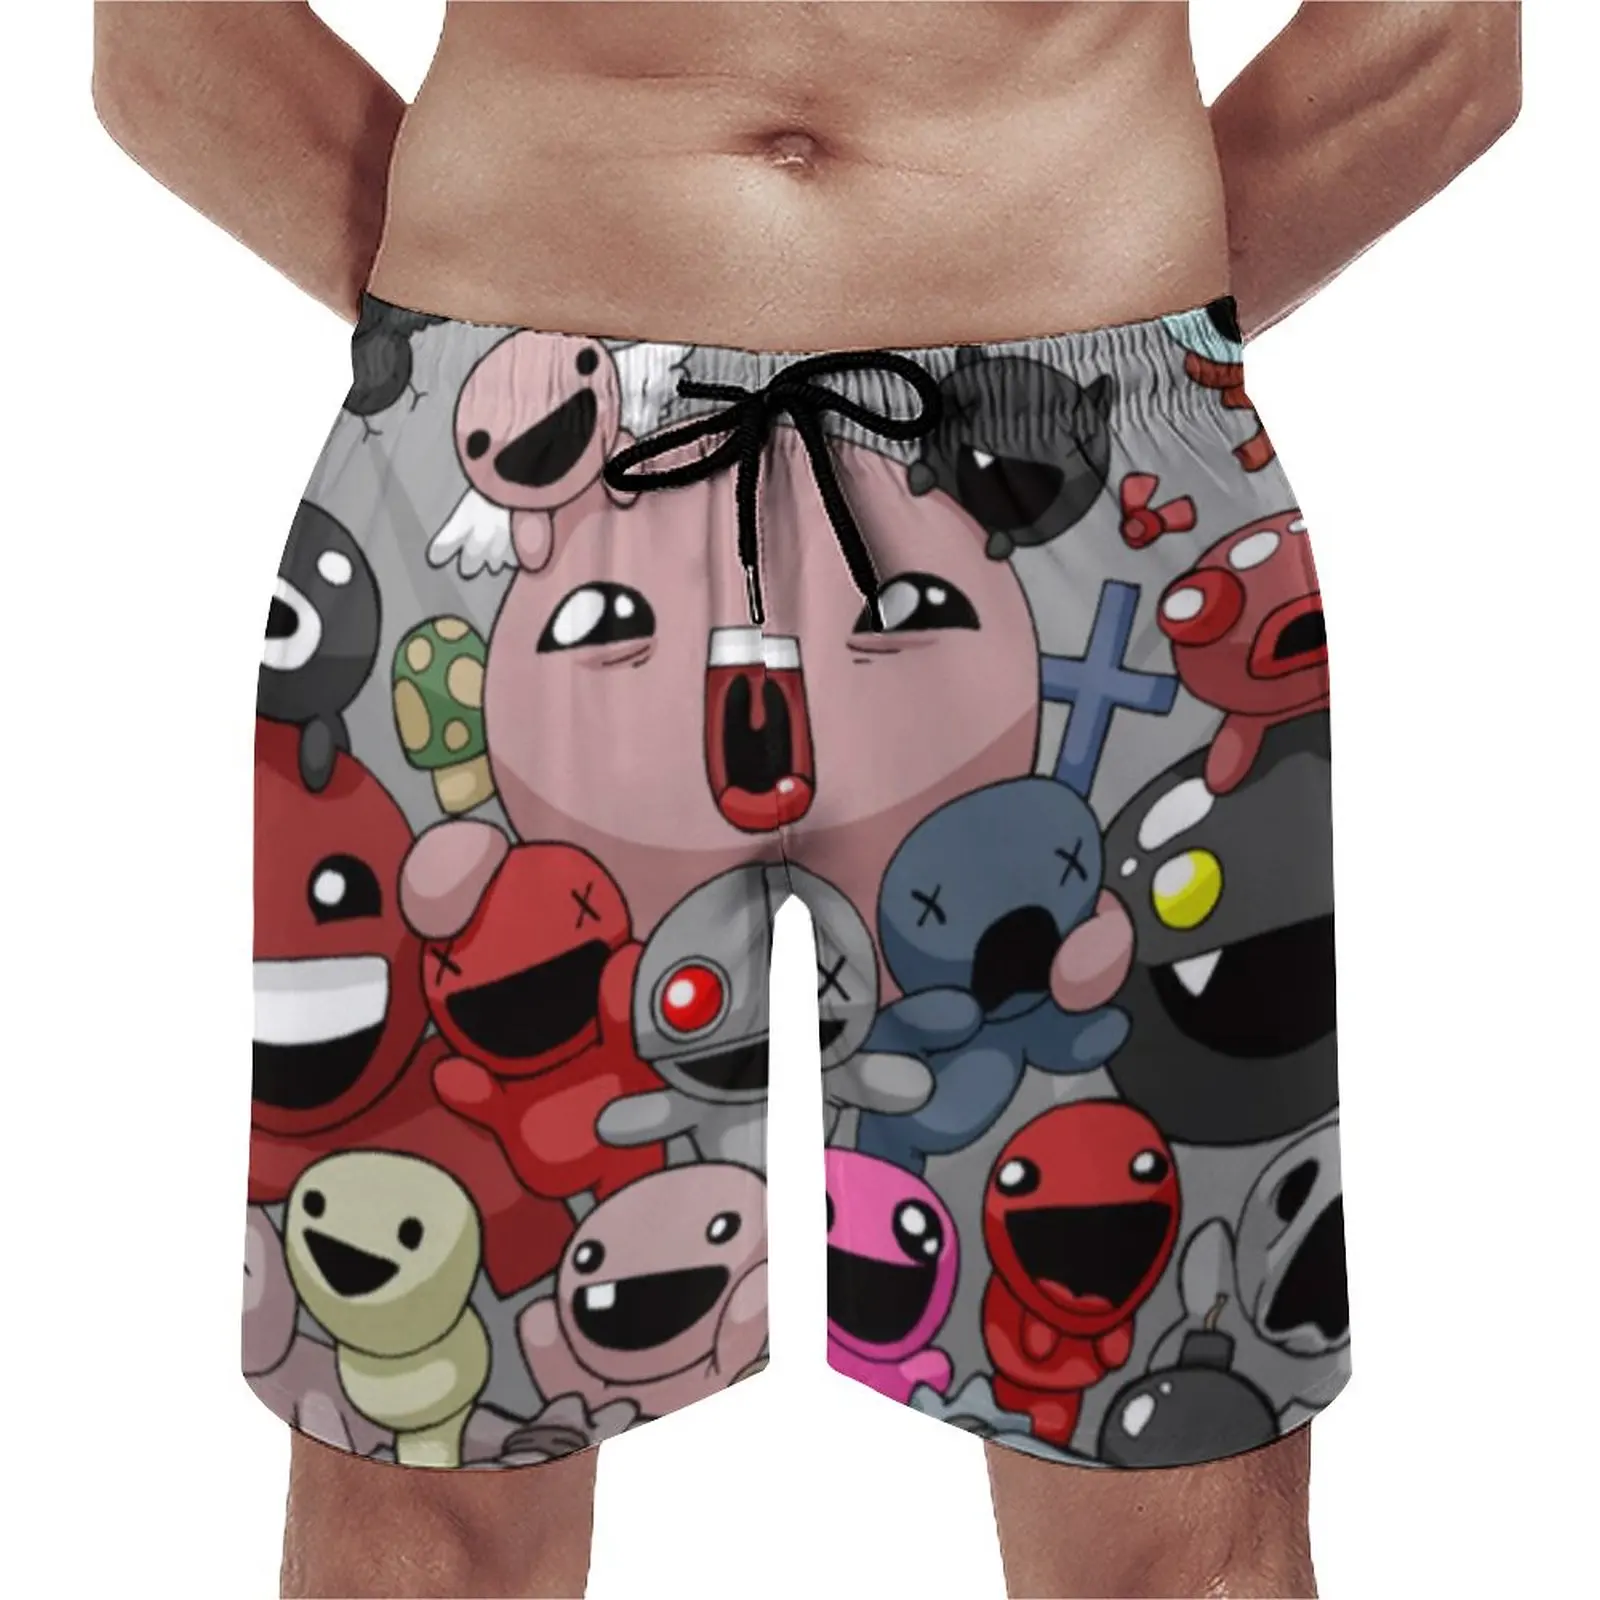 

Binding Of Isaac Gym Shorts Video Game Afterbirth Wolf Comic Death Casual Beach Short Pants Sports Surf Quick Dry Beach Trunks